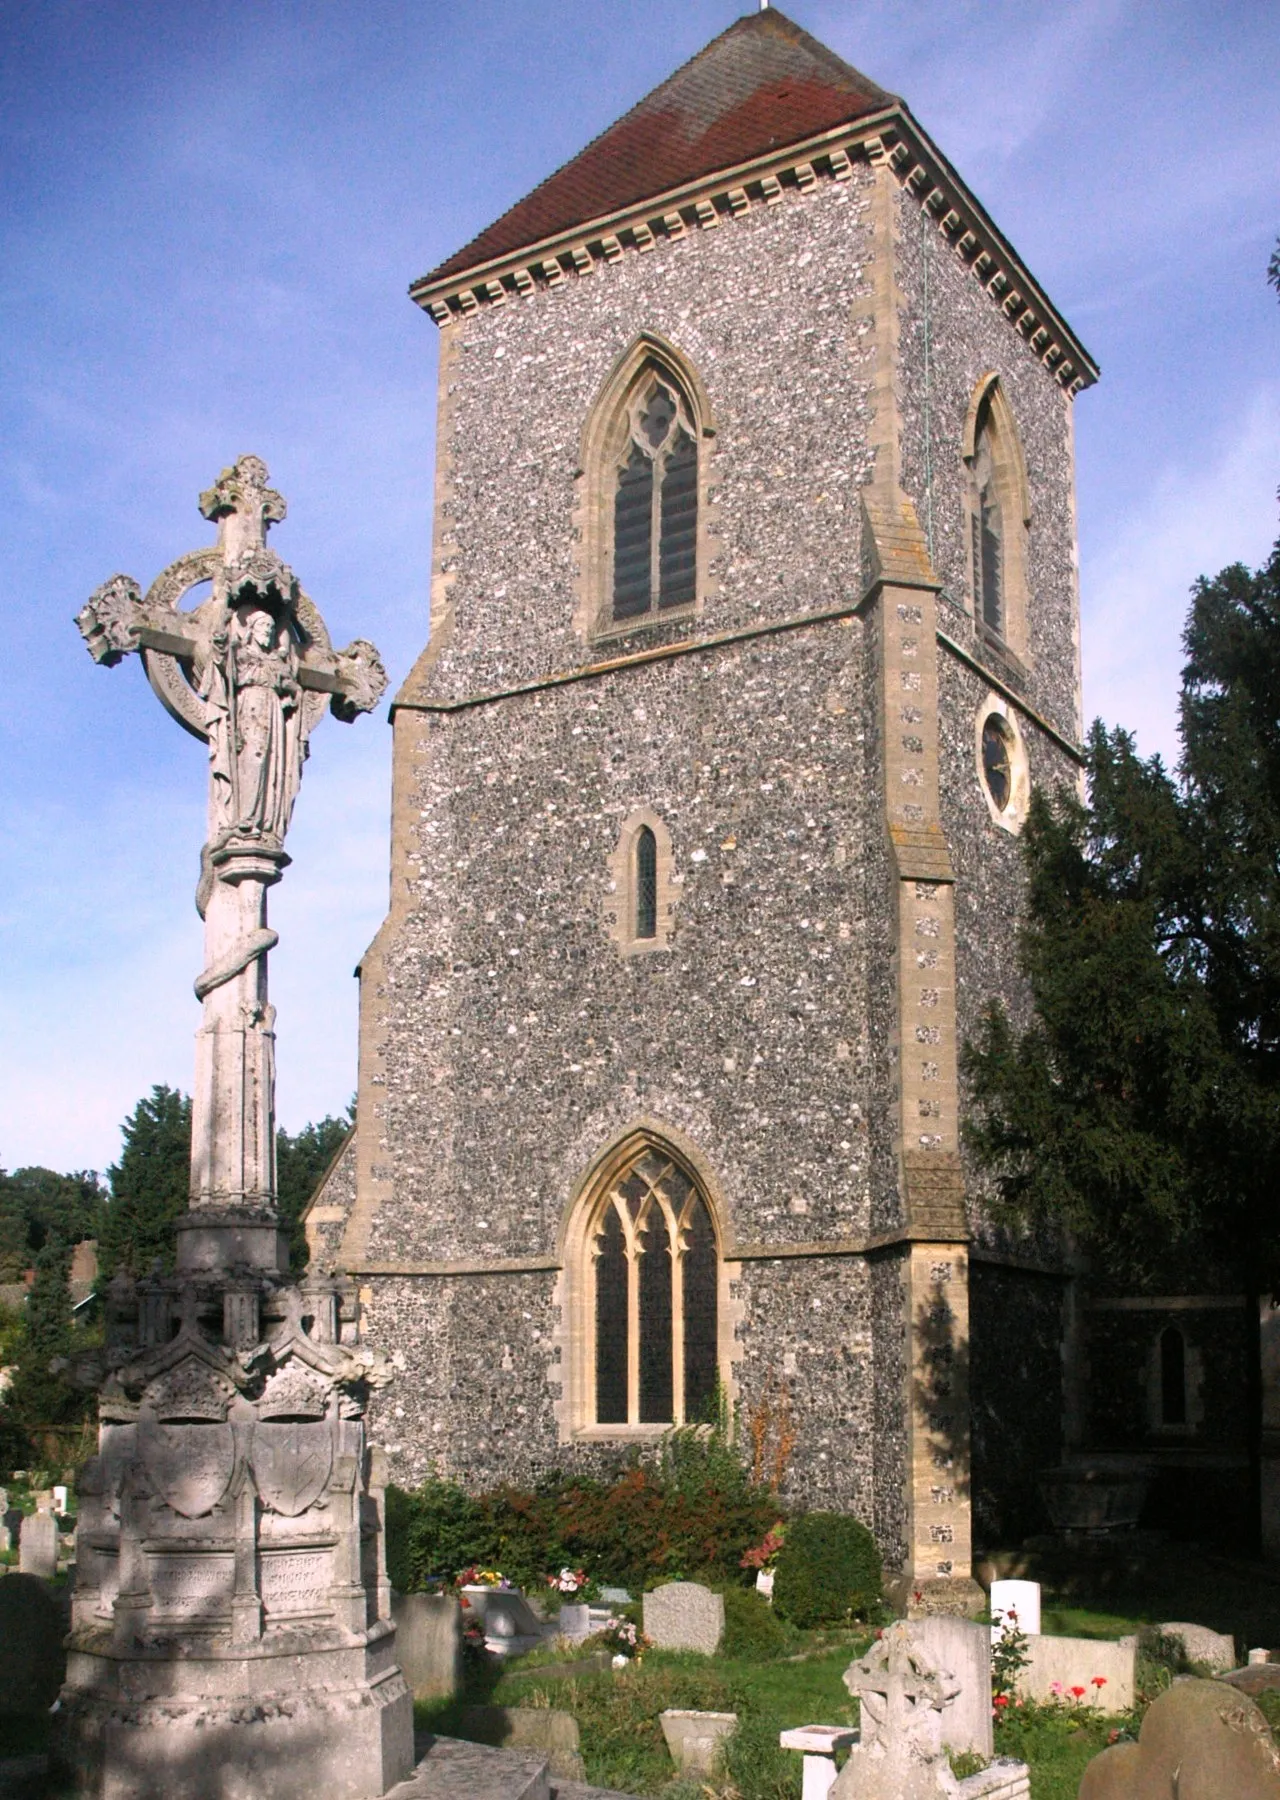 Photo showing: West tower of St Mary's parish church, Addington, London Borough of Croydon, with the memorial to five Archbishops in the left foreground